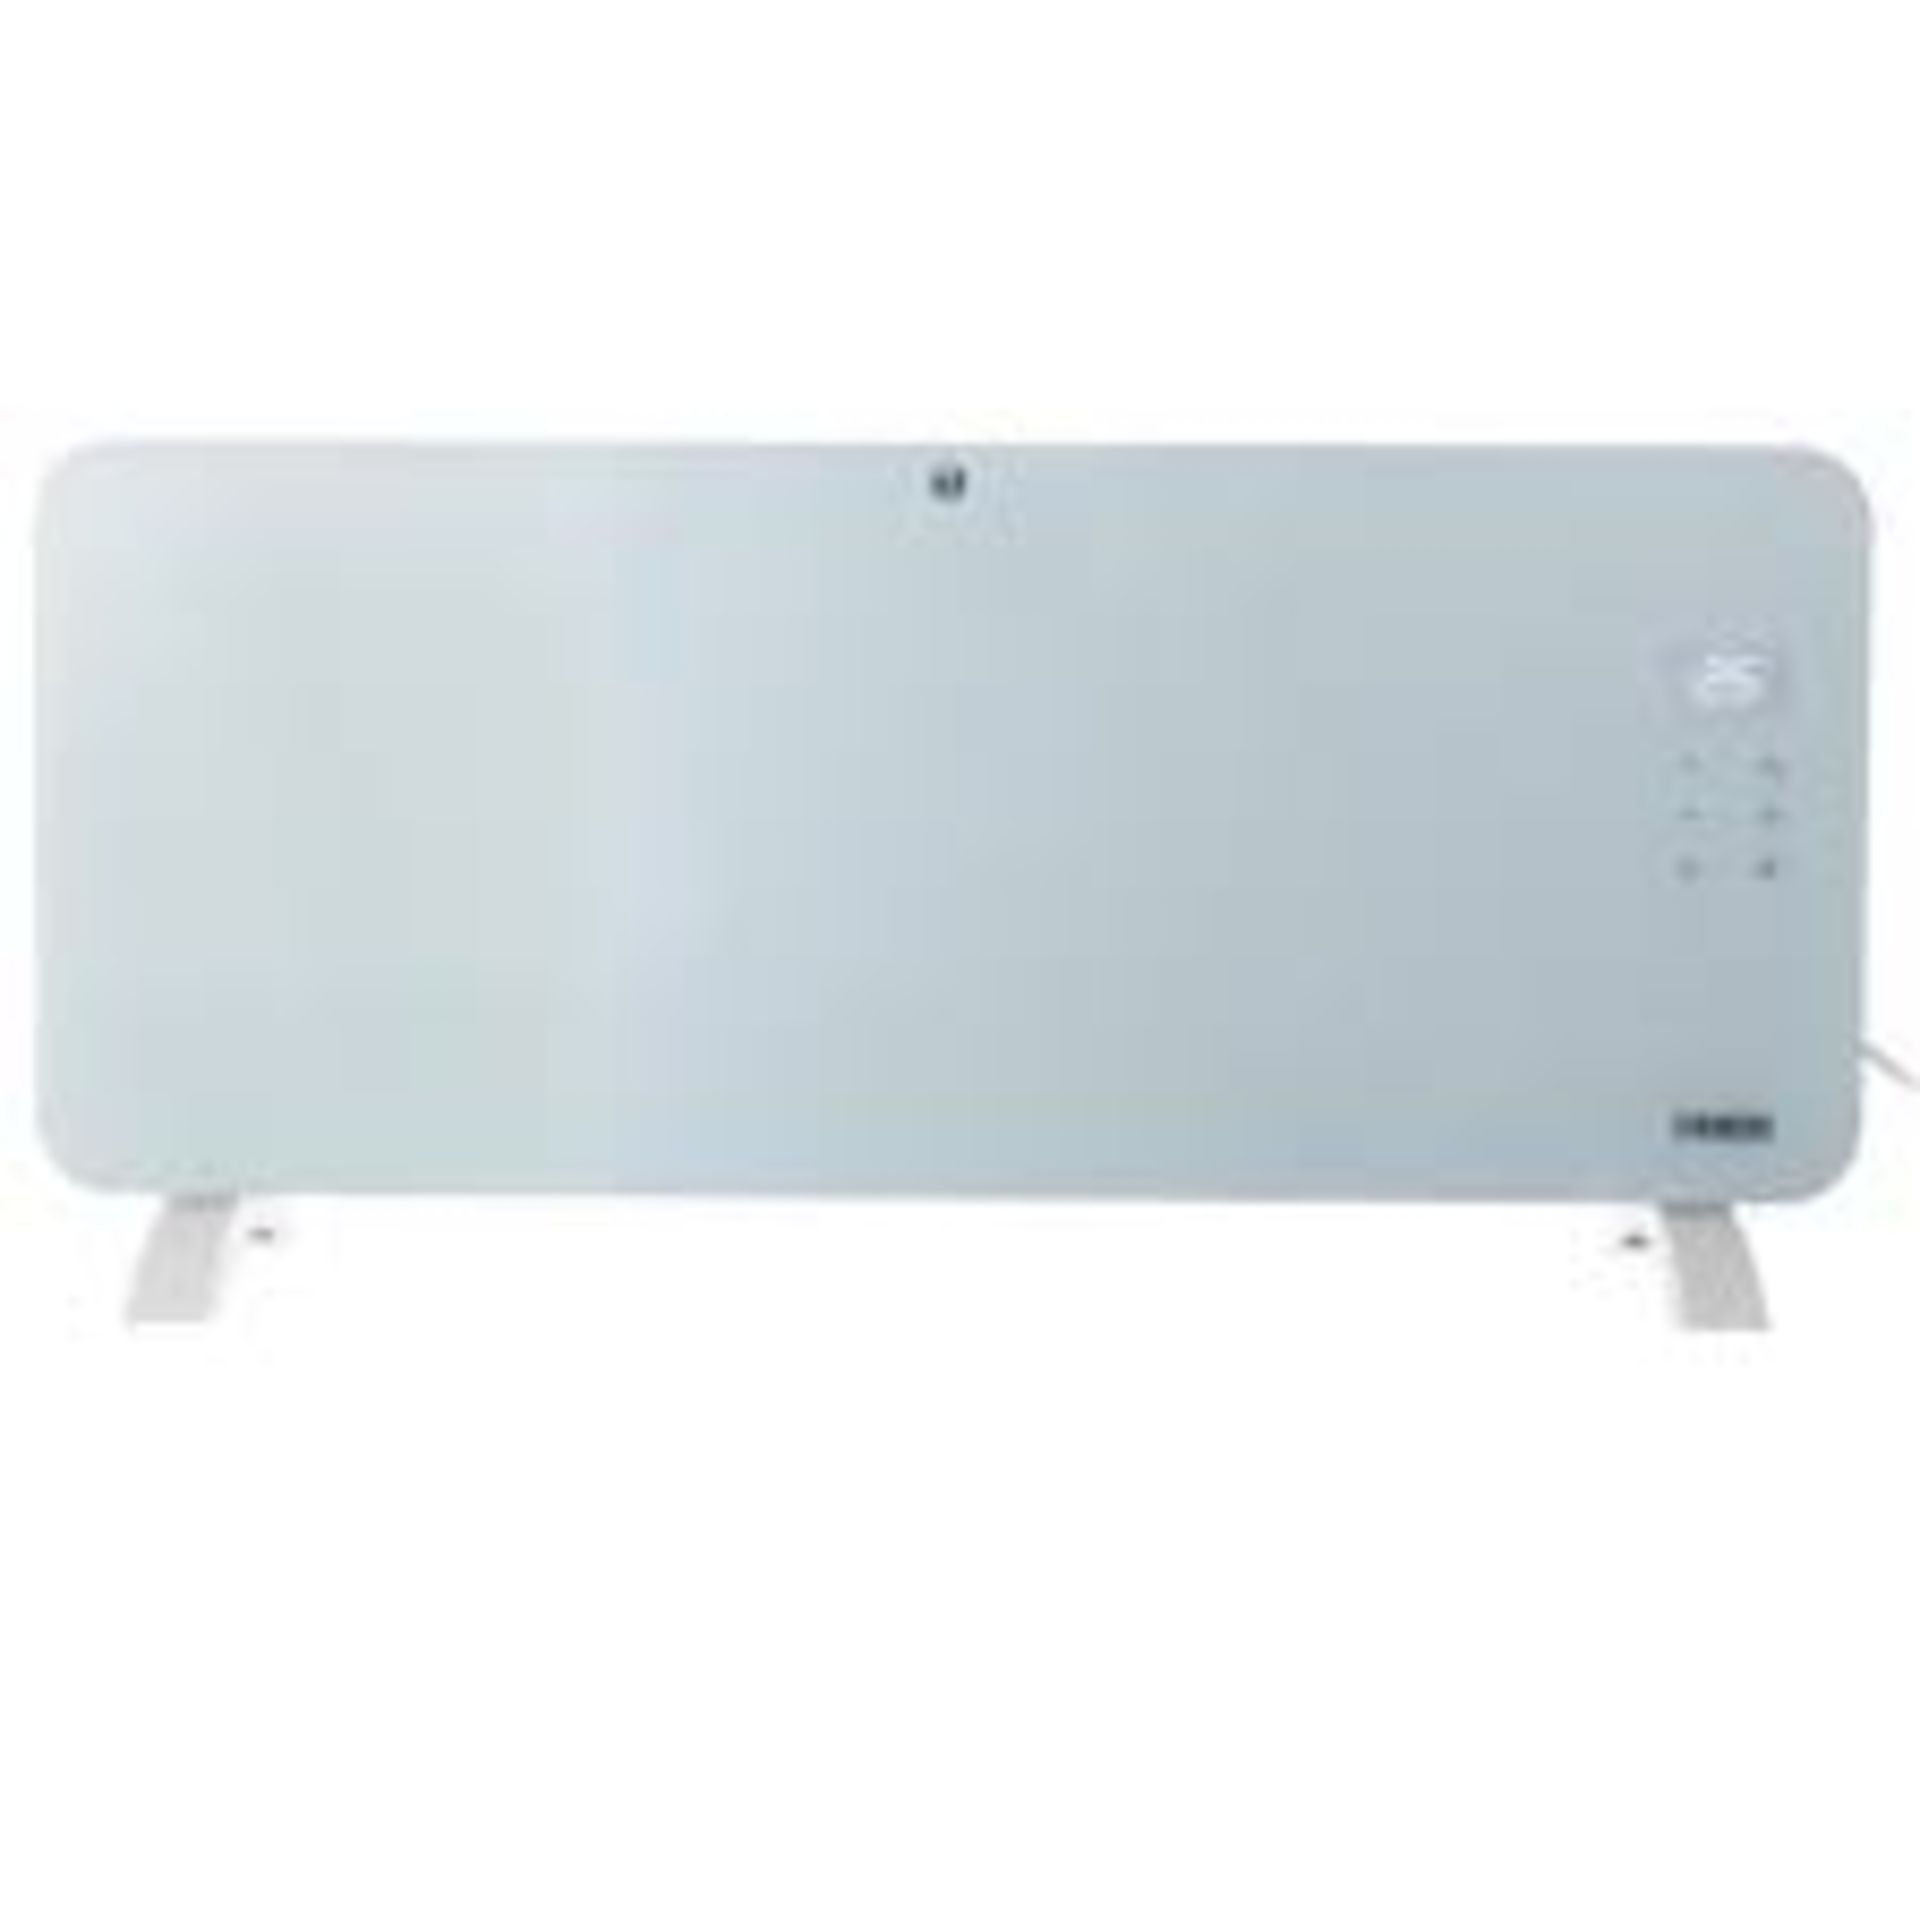 Princess Glass Smart Panel Heater, 2000 W, Smart Control and Free App, Works with Alexa. - BW.